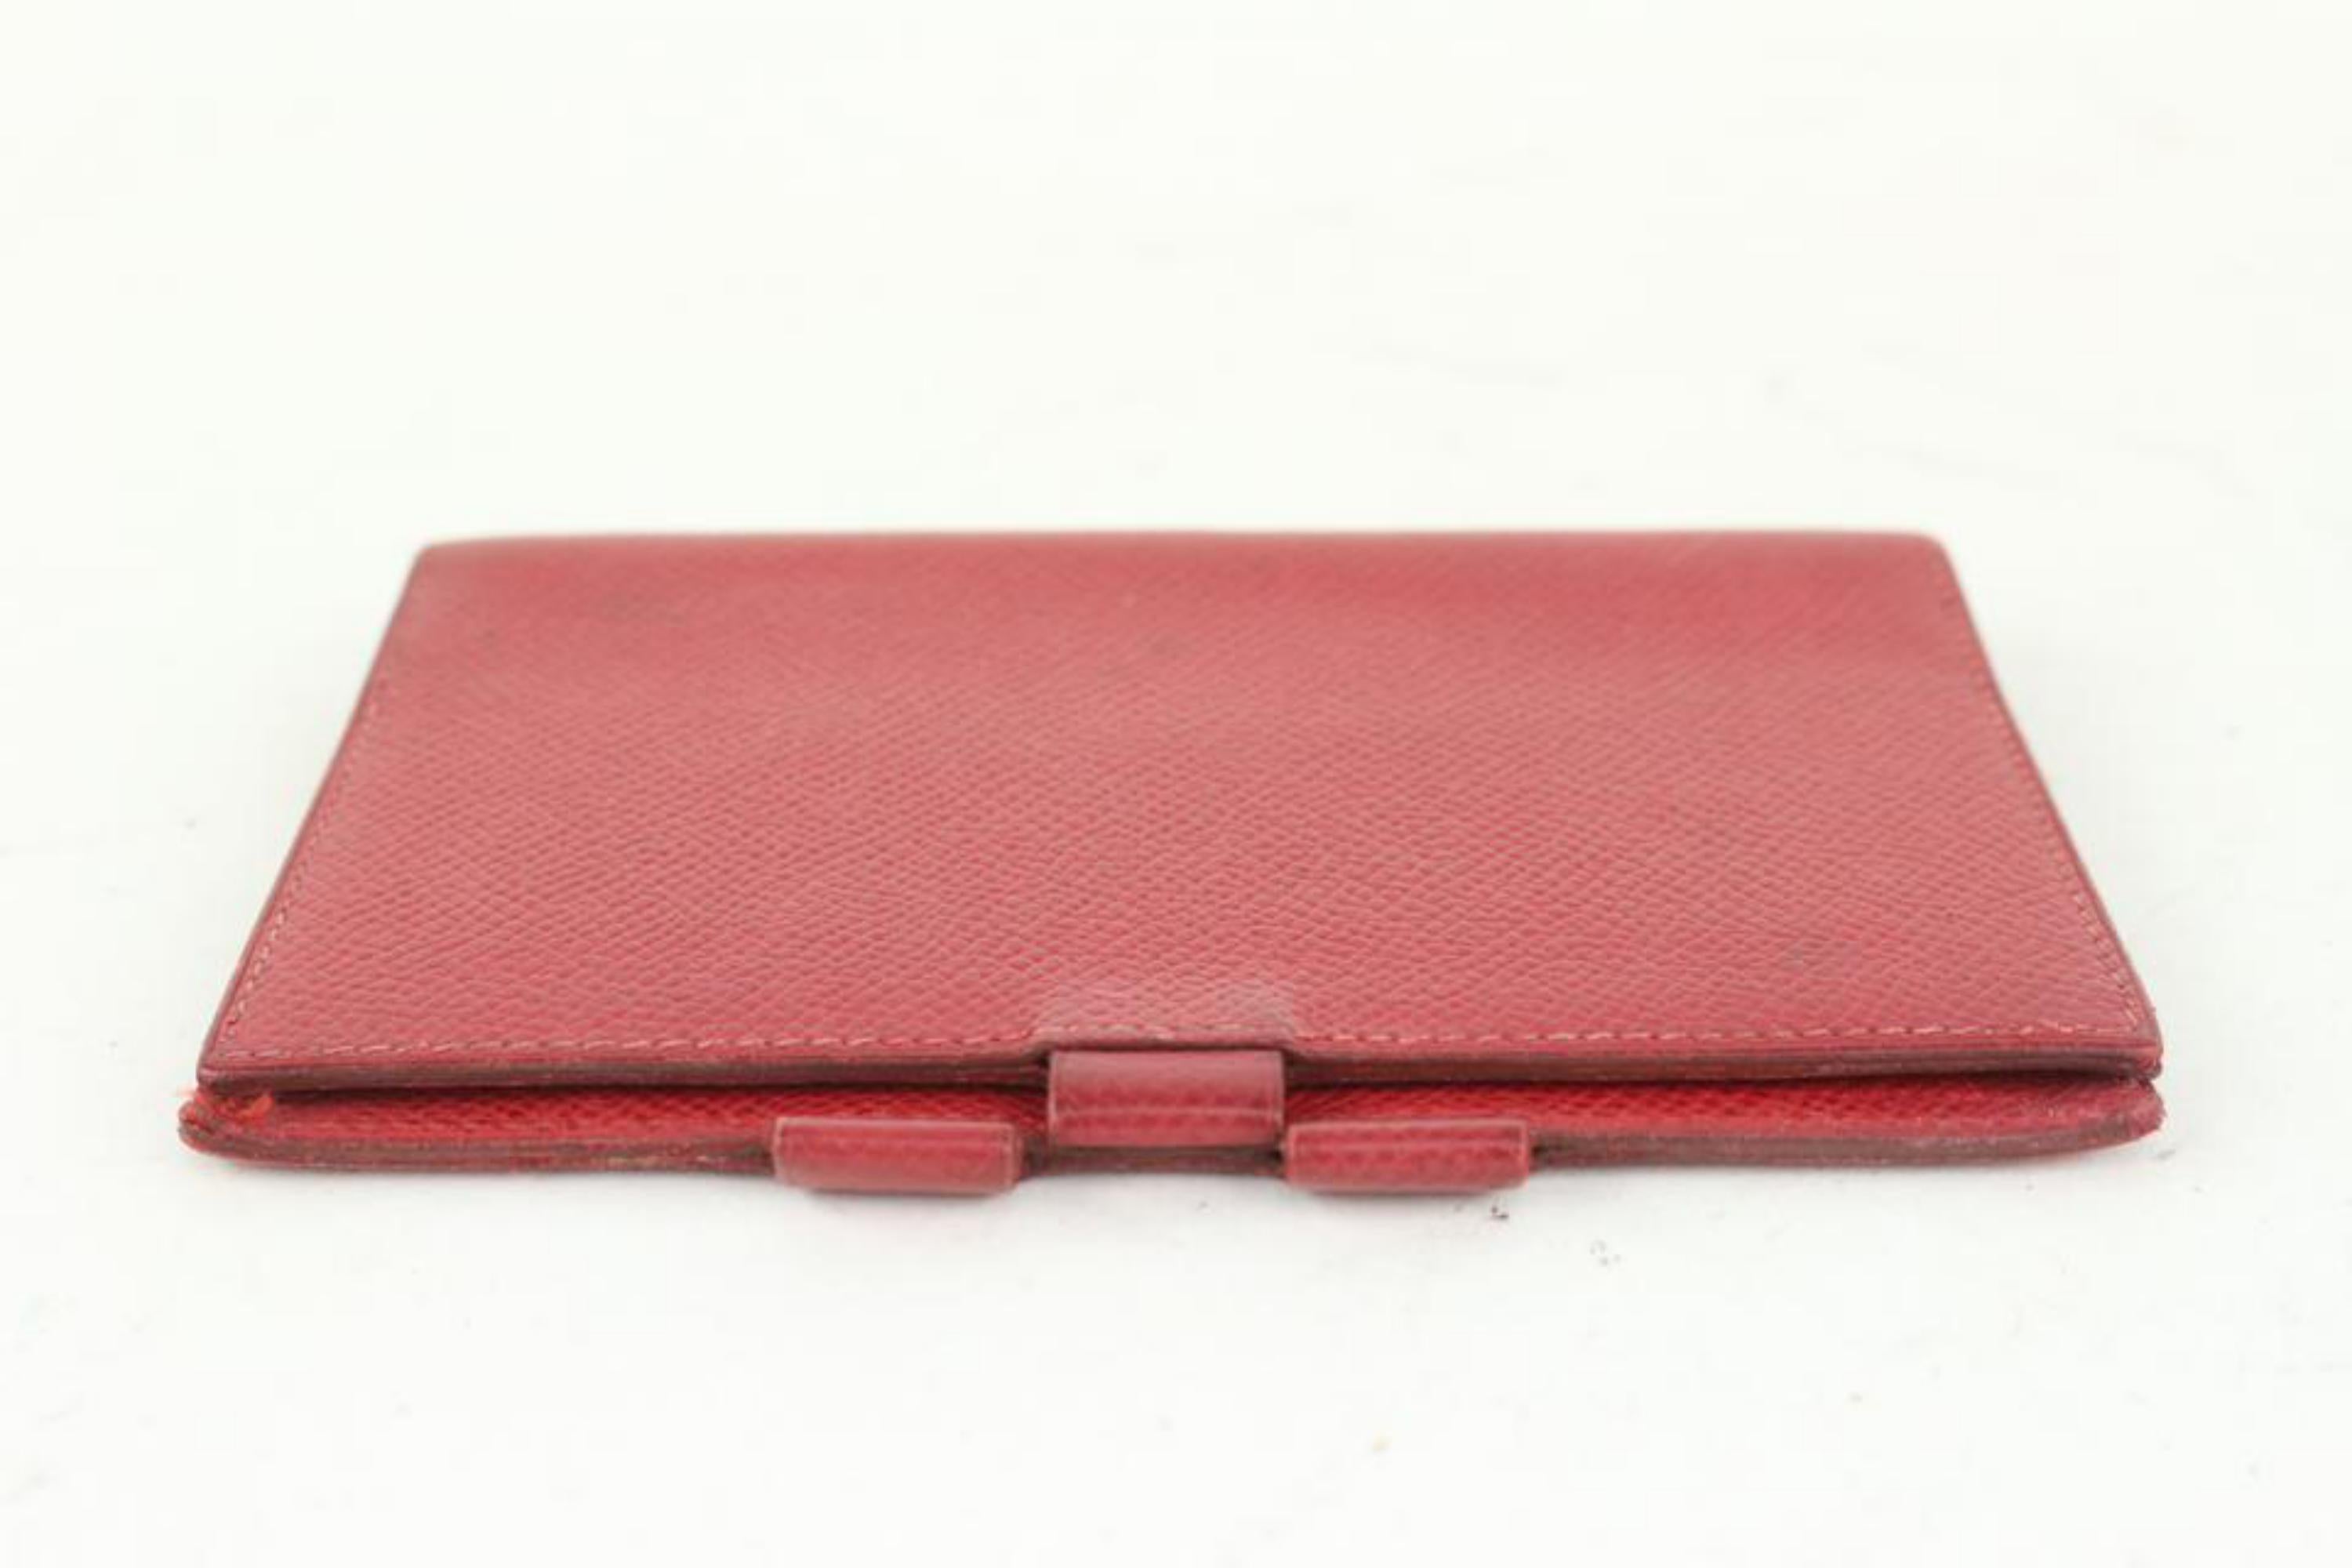 Hermès Small Red Epsom Leather Agenda 1020h36 For Sale 2